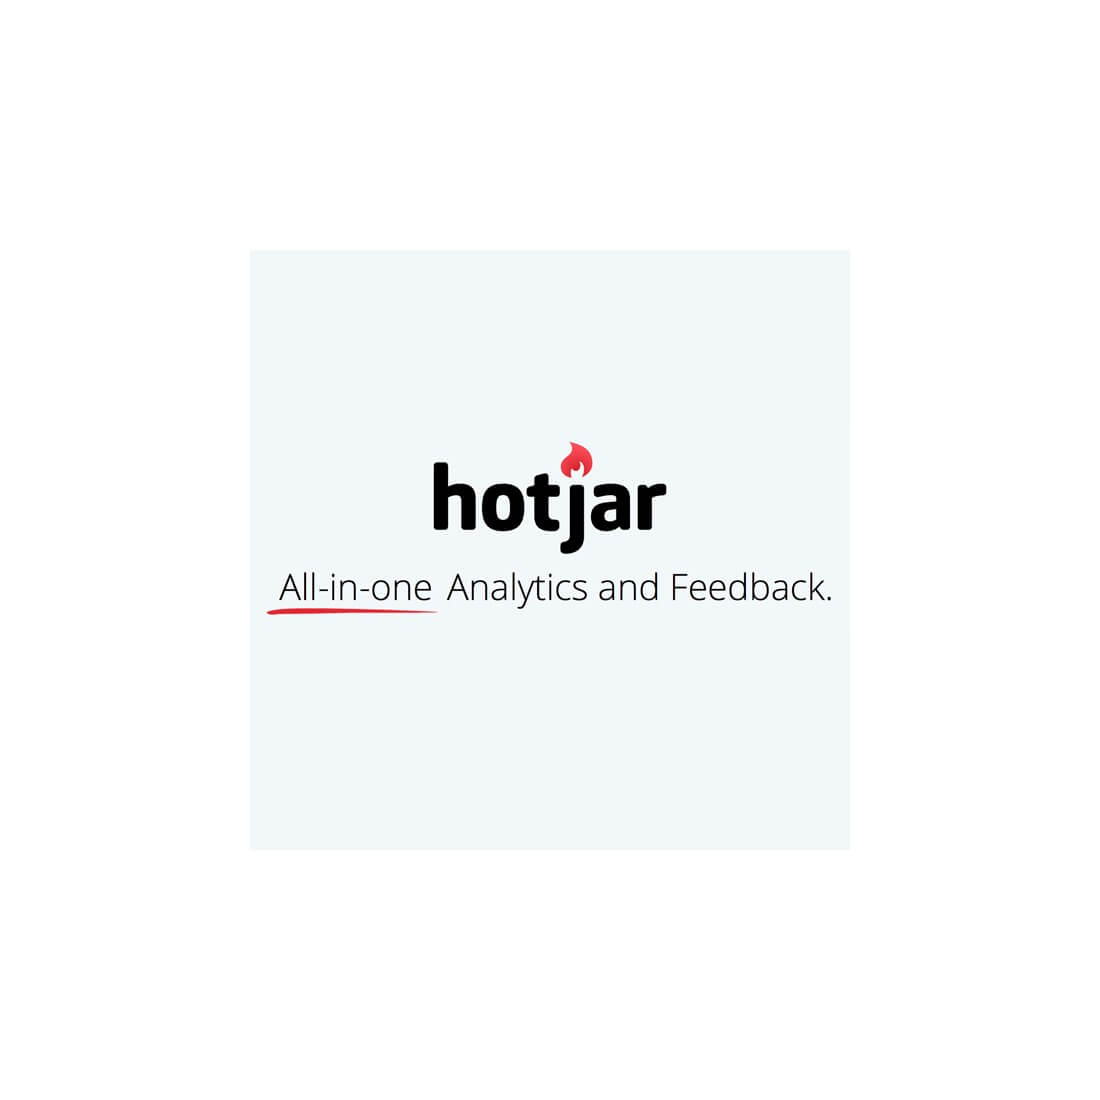 Hotjar logo redesign by Alessandro Gerotto on Dribbble